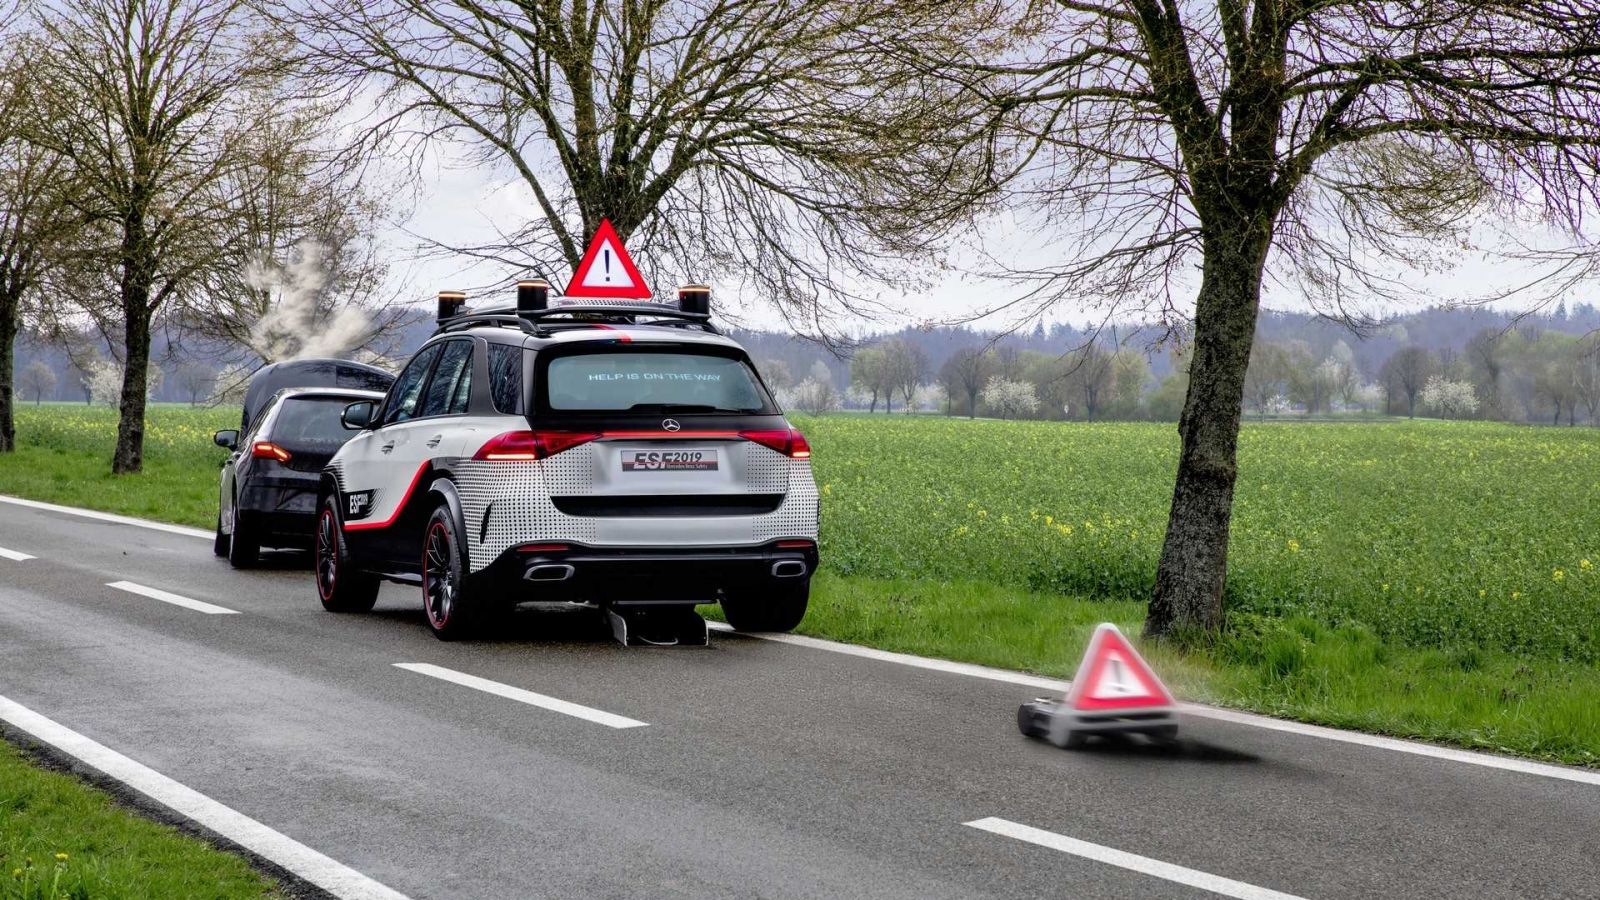 Mercedes-Benz ESF 2019 Experimental Safety Vehicle